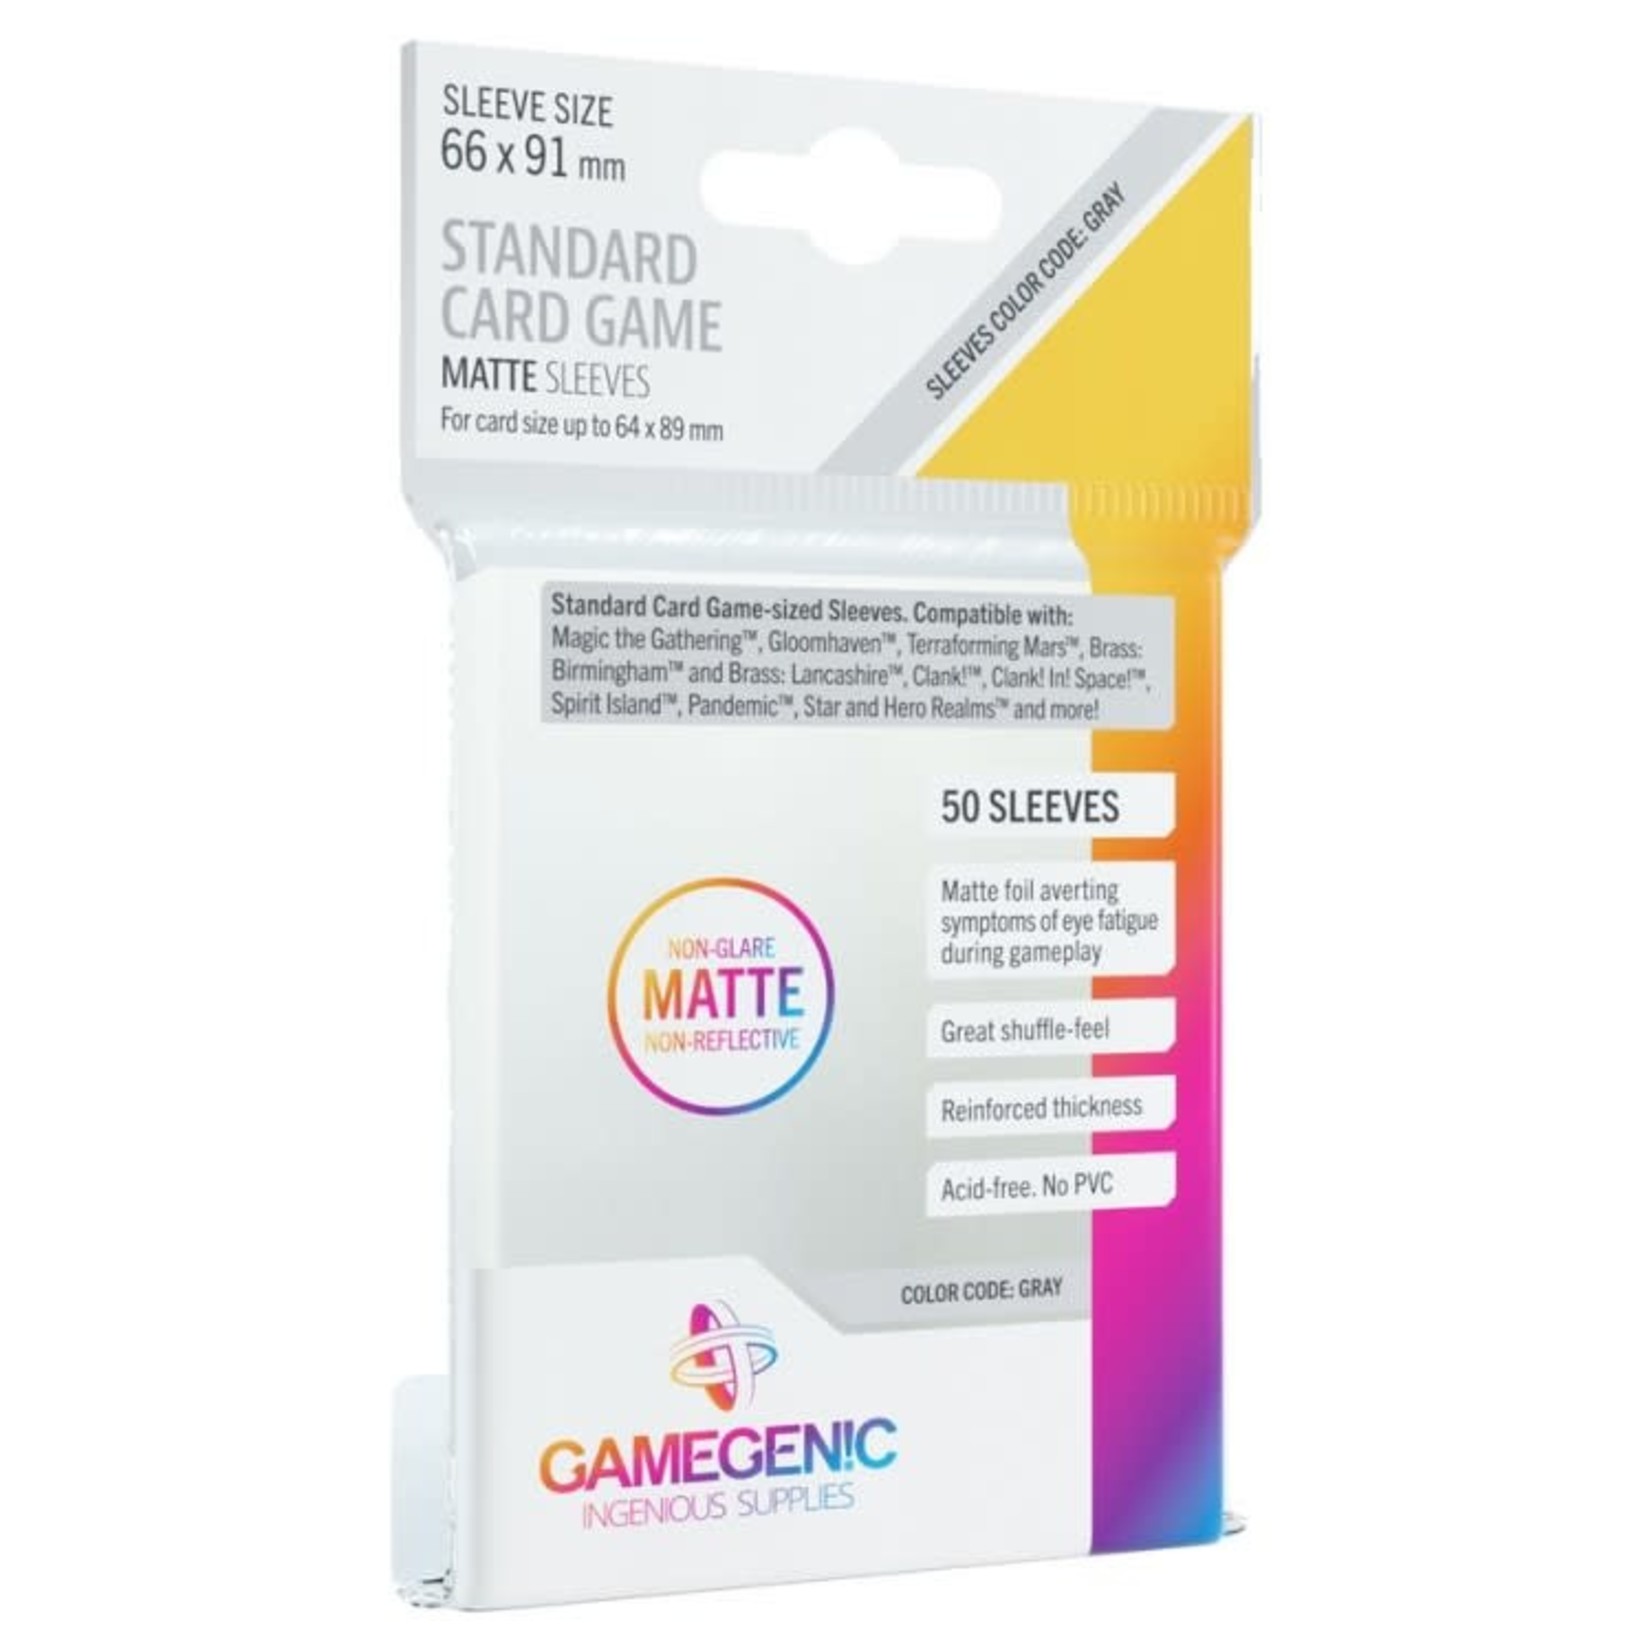 Gamegenic Gamegenic Sleeves: Standard Card Game MATTE - 50 count (66x91mm)